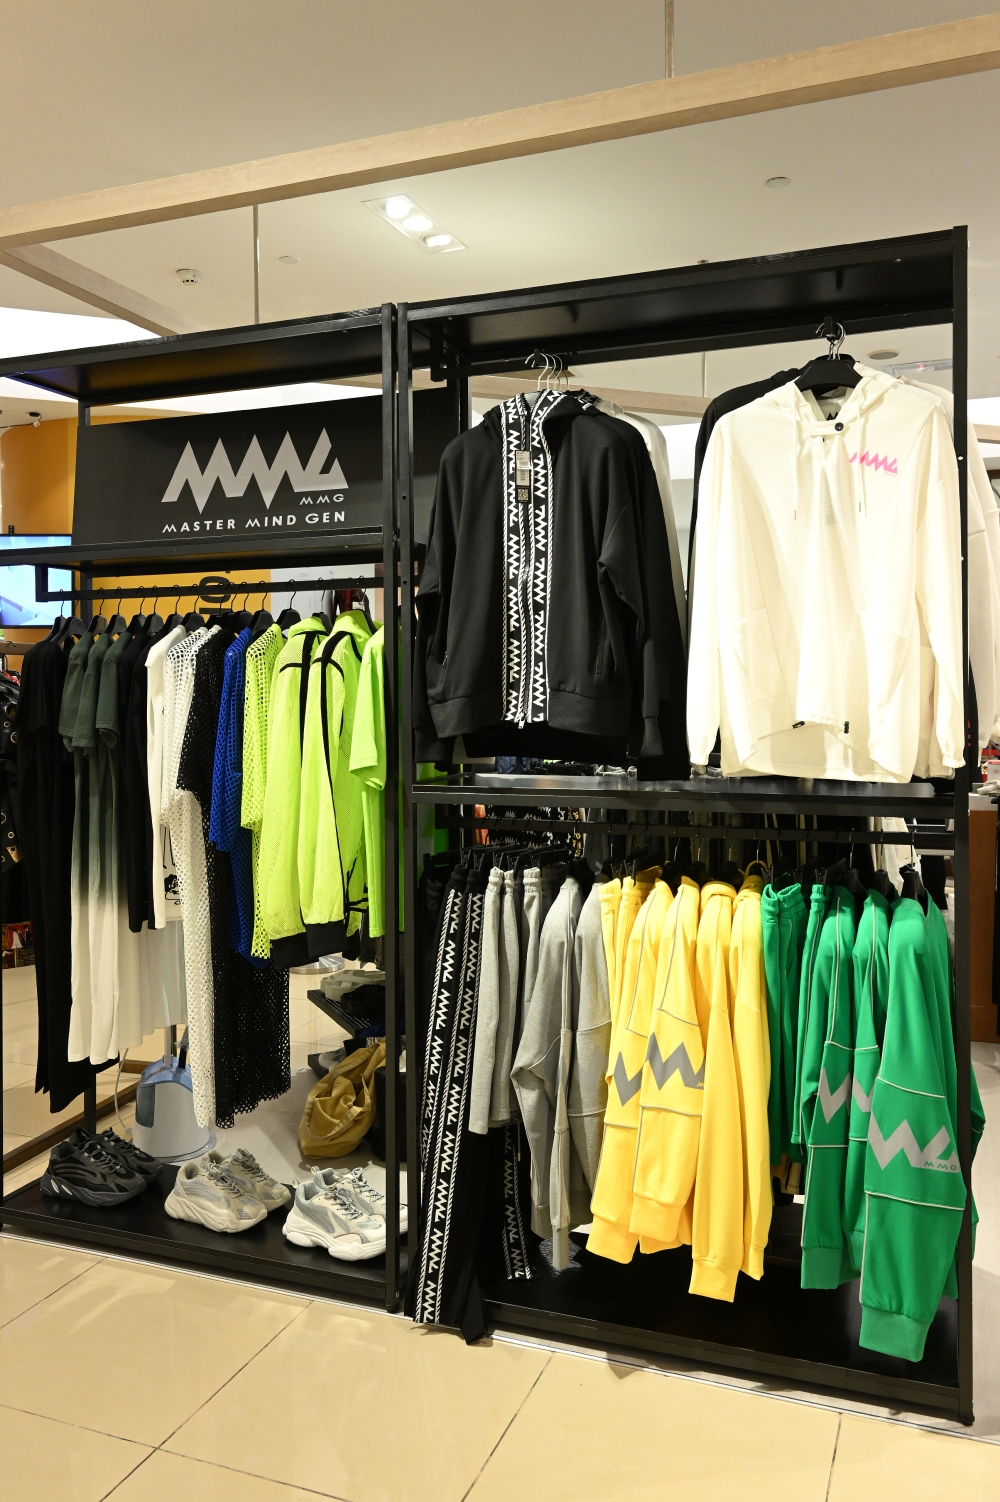 MMG offers a variety of unisex fashion and is now available at Isetan of The Gardens Mall. — Picture courtesy of MMG